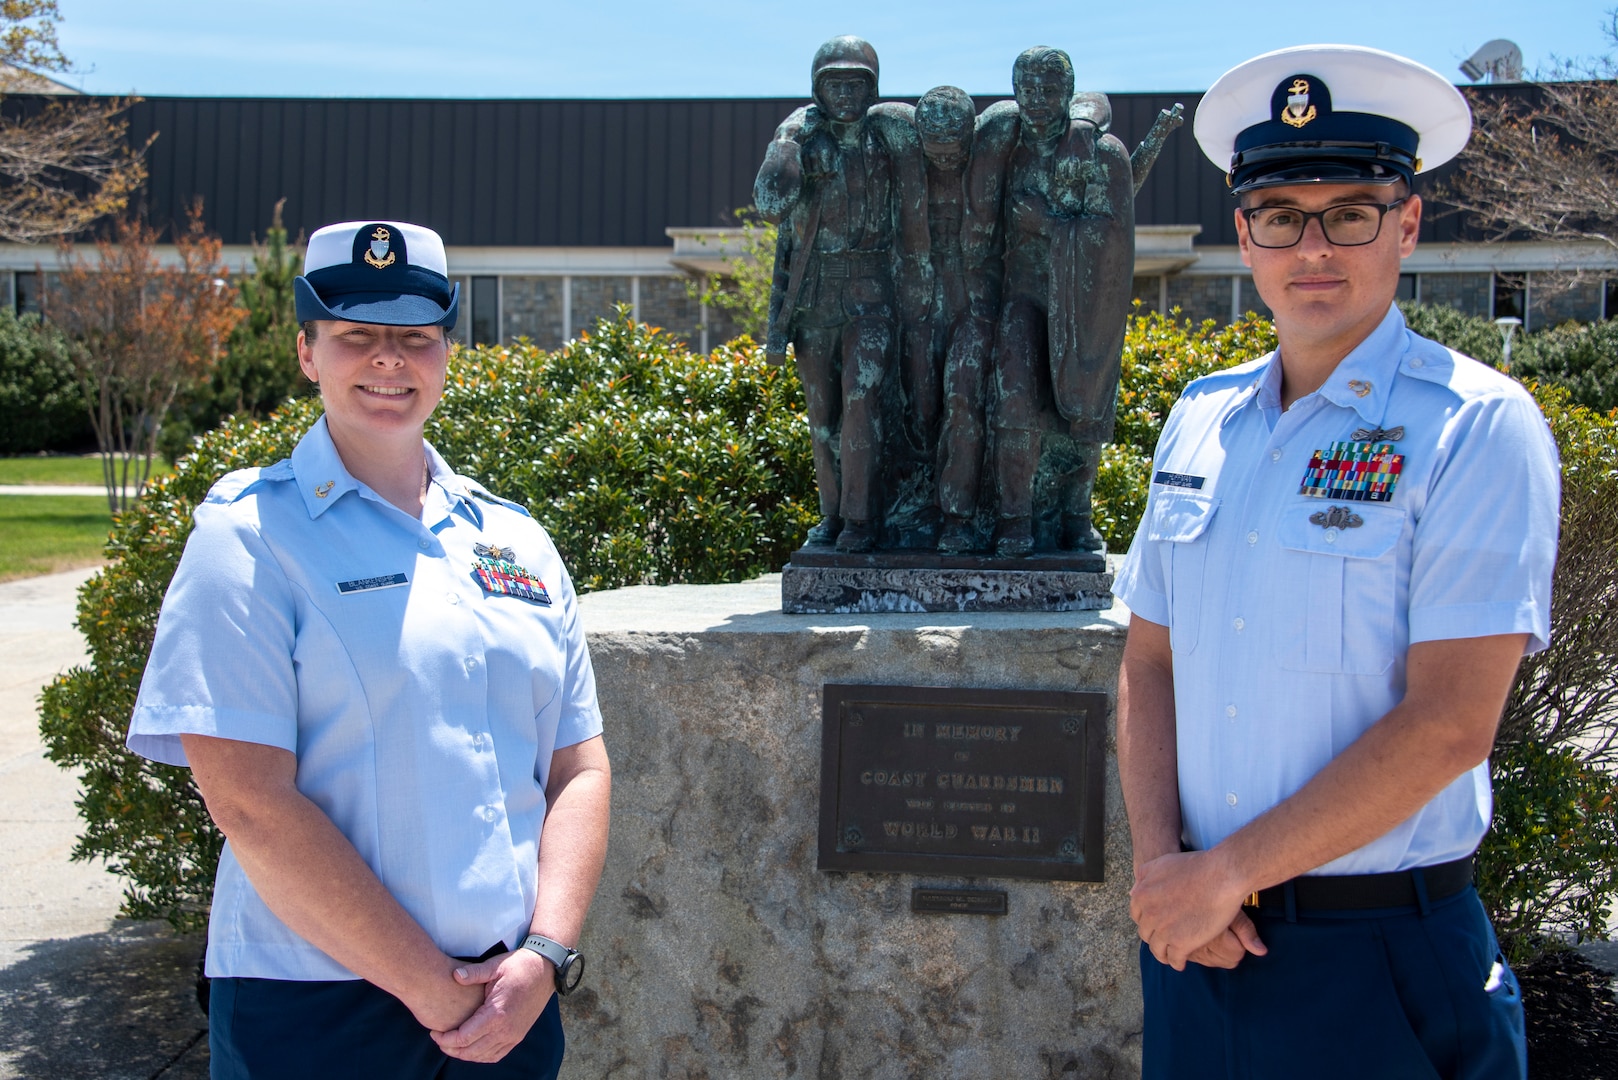 Chief Petty Officer Kailea Blankenship, a boatswain’s mate with USCG Station Galveston, the Coast Guard 2021 Enlisted Person of the Year - Active Duty Component; and Chief Petty Officer Ryan Huffman, a machinery technician with USCG Staton Channel Islands, the Coast Guard 2021 Enlisted Person of the Year - Reserve Component, pose for a photo after being recognized by Master Chief Petty Officer Jason Vanderhaden and Master Chief Petty Officer of the Coast Guard Reserve George Williamson at Coast Guard Training Center Cape May, New Jersey, May 18, 2022. (U.S. Coast Guard photo by Petty Officer 1st Class Lisa Ferdinando)